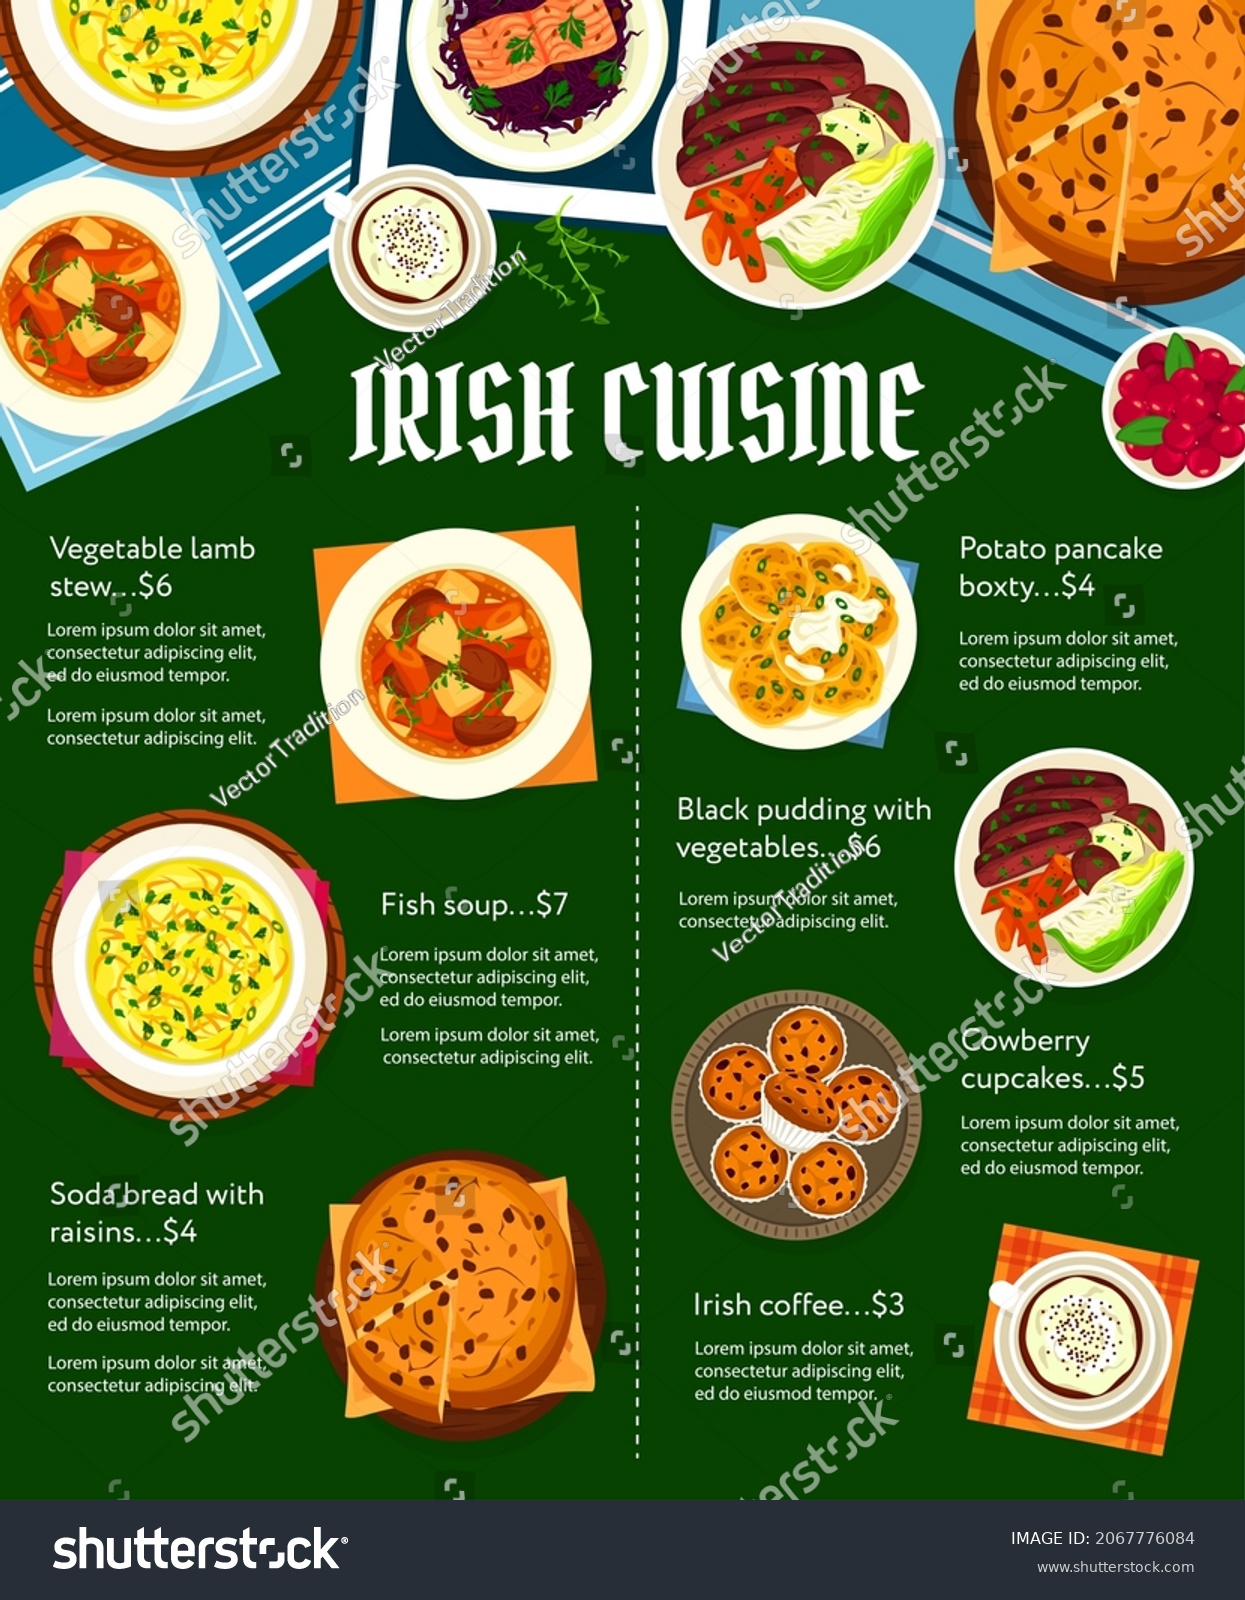 SVG of Irish cuisine vector menu potato pancake boxty, fish soup and soda bread with raisins. Irish coffee, cowberry cupcakes, vegetable lamb stew and black pudding with vegetables Ireland food meals svg